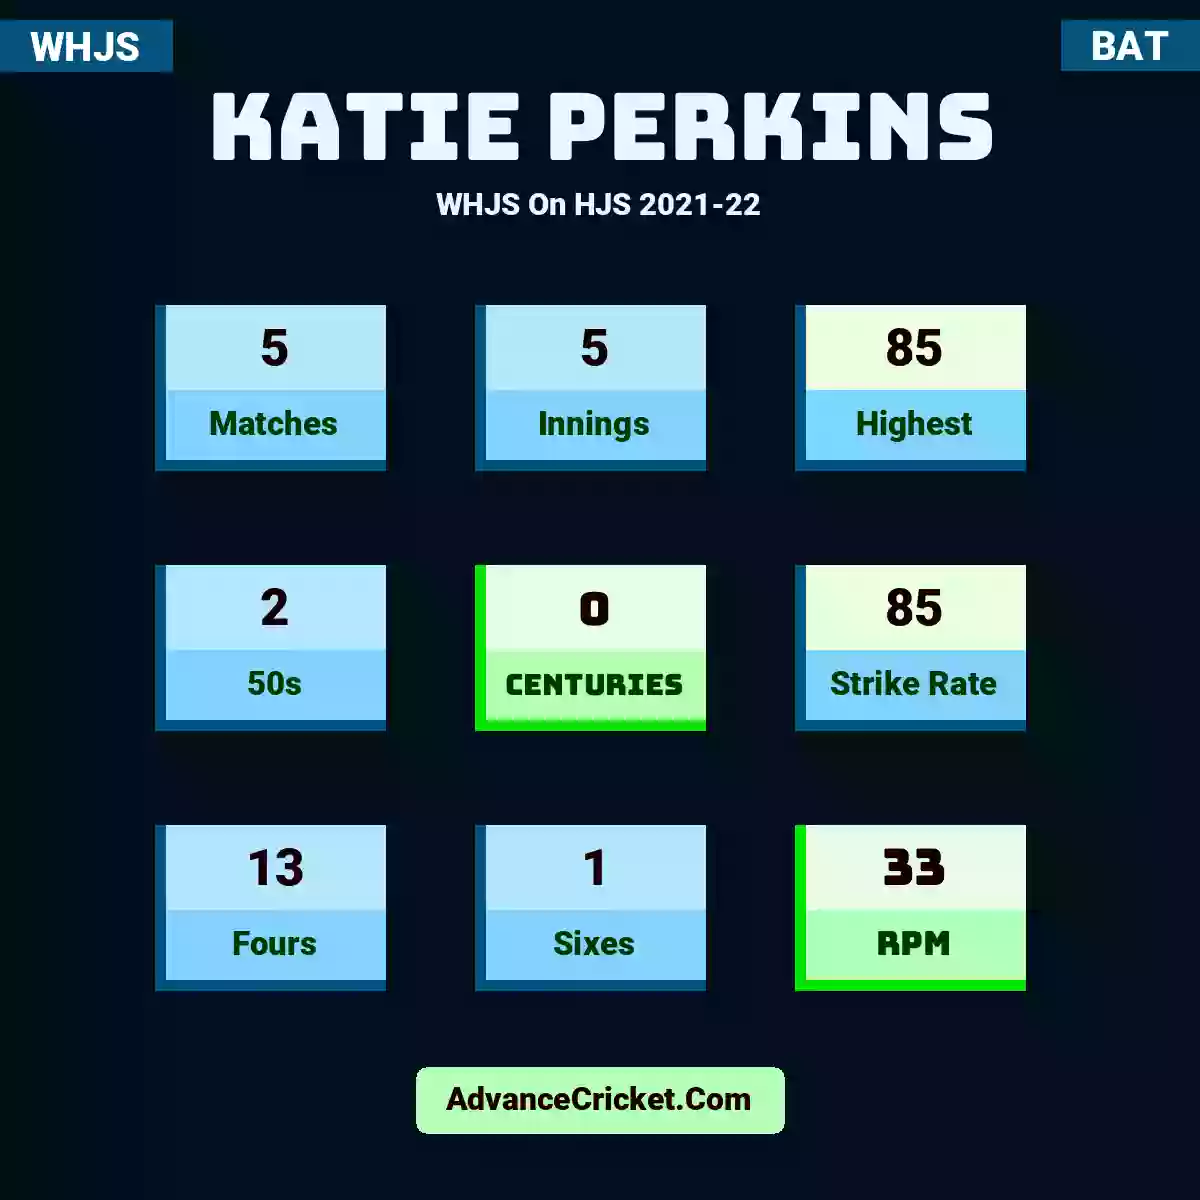 Katie Perkins WHJS  On HJS 2021-22, Katie Perkins played 5 matches, scored 85 runs as highest, 2 half-centuries, and 0 centuries, with a strike rate of 85. K.Perkins hit 13 fours and 1 sixes, with an RPM of 33.